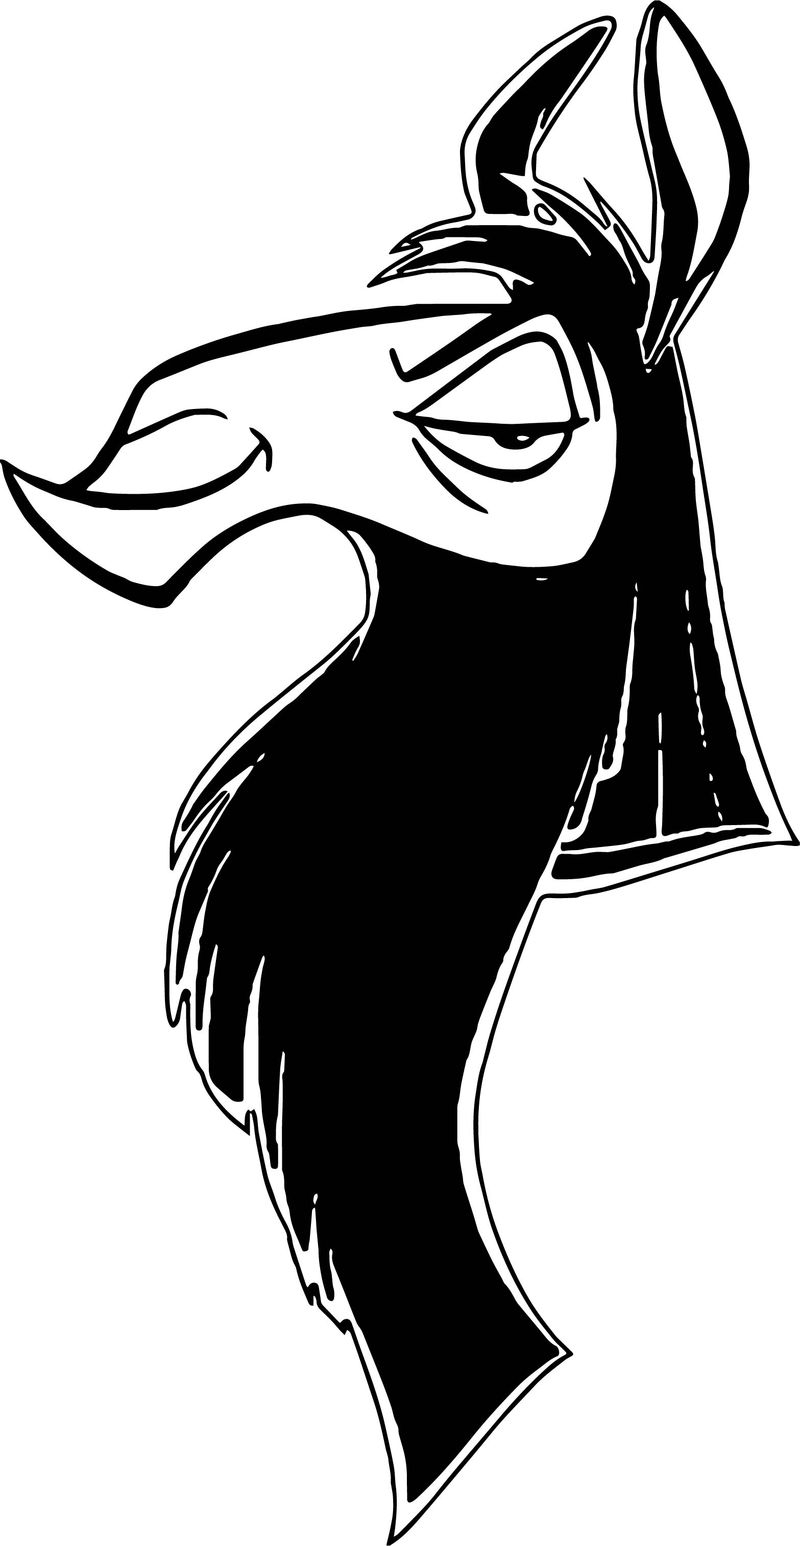 Sheep Face Coloring Page The Emperor New Groove Kuzco Sheep Face Disney Coloring Pages